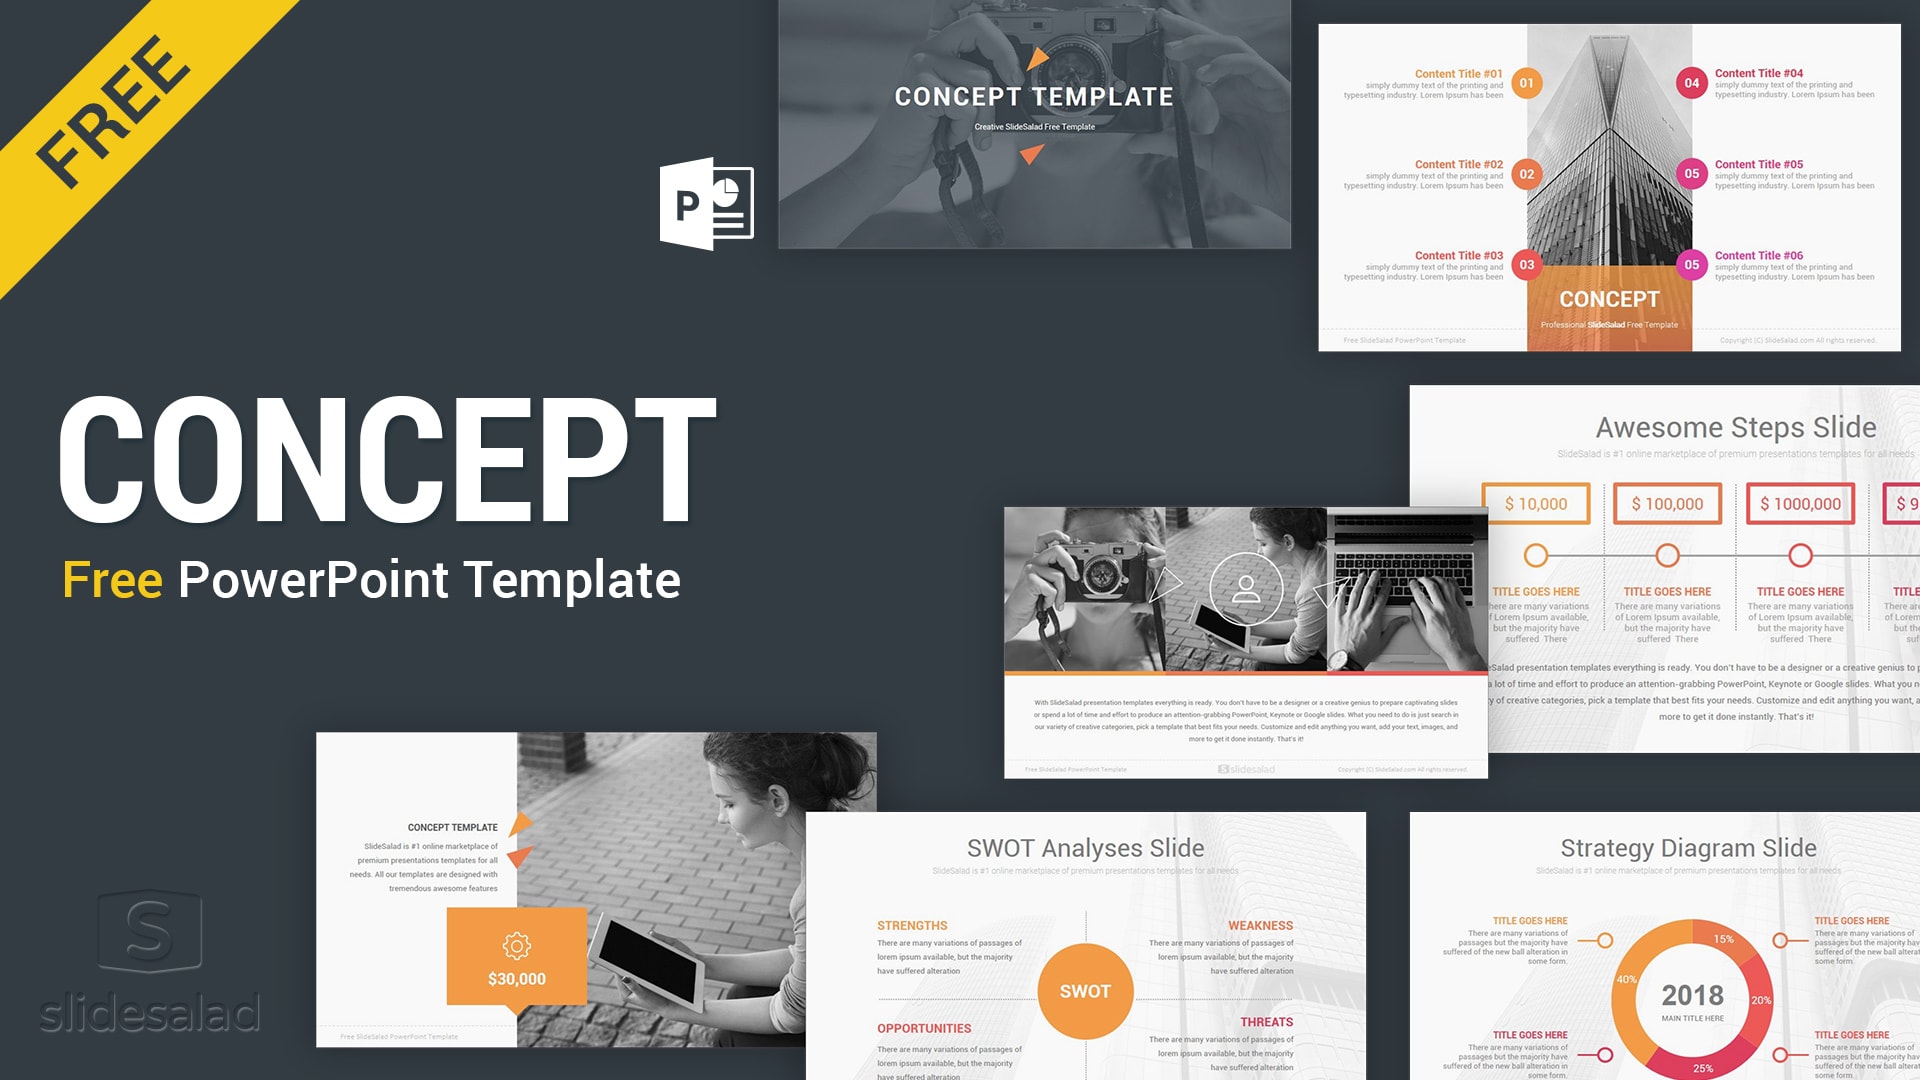 Concept Free PowerPoint Presentation Template - Free Download PPT Inside Free Powerpoint Presentation Templates Downloads